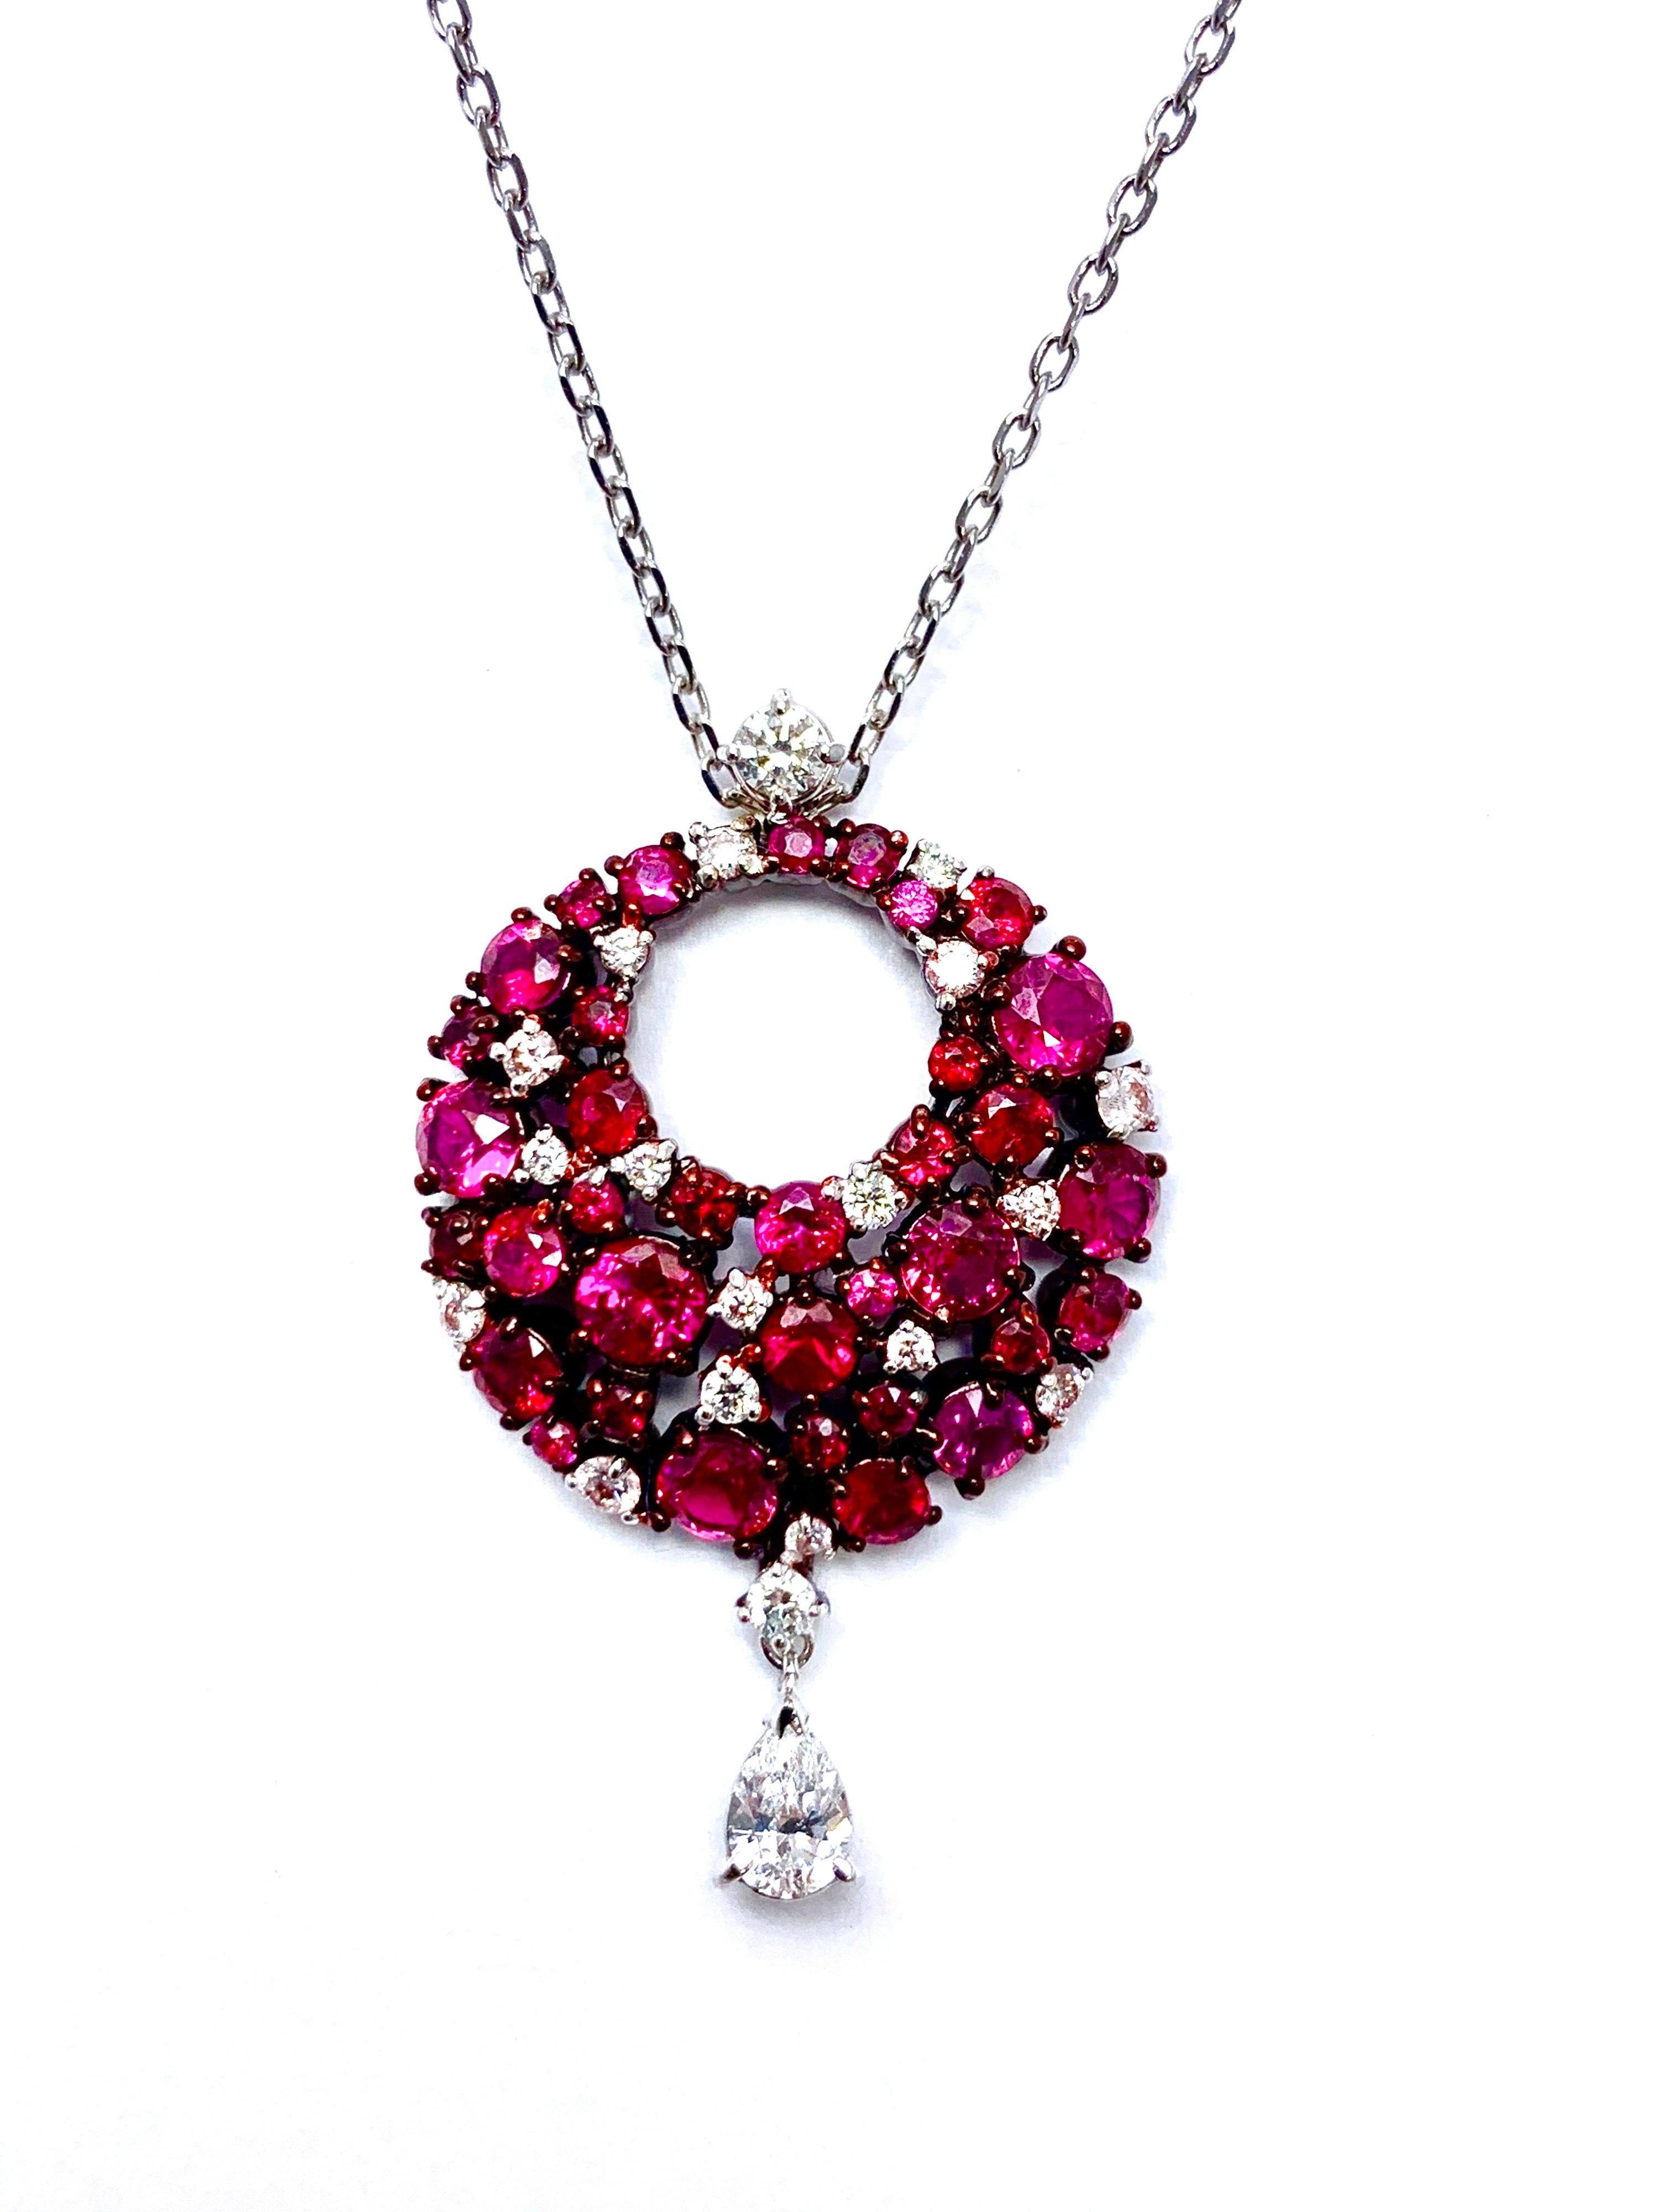 Exquisite Ruby and Diamond Pendant, part of the Eclipse Collection of Mariani. Features multiple shapes and hues of Rubies and Diamonds arranged in this circle and finished with a pear shape diamond drop at the base.  There is a total of 2.25 carats